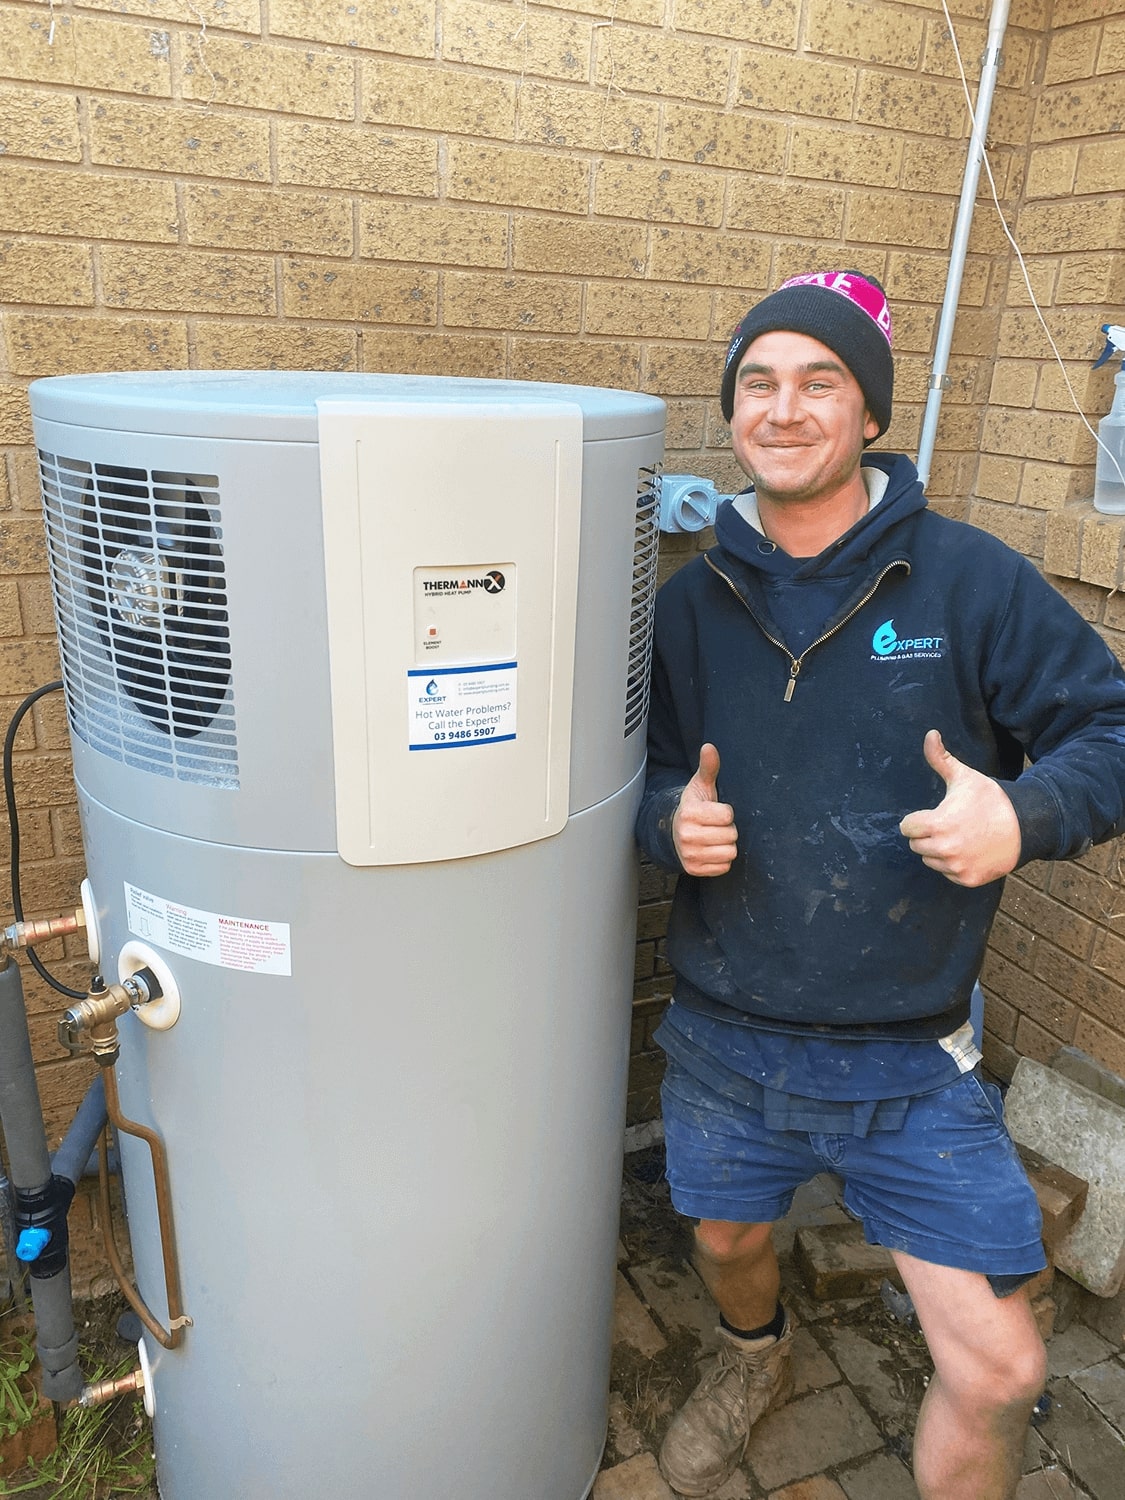 Thermann Hyrbrid Heat Pump System in front of brick wall . A friendly plumber is smiling and giving a thumbs-up